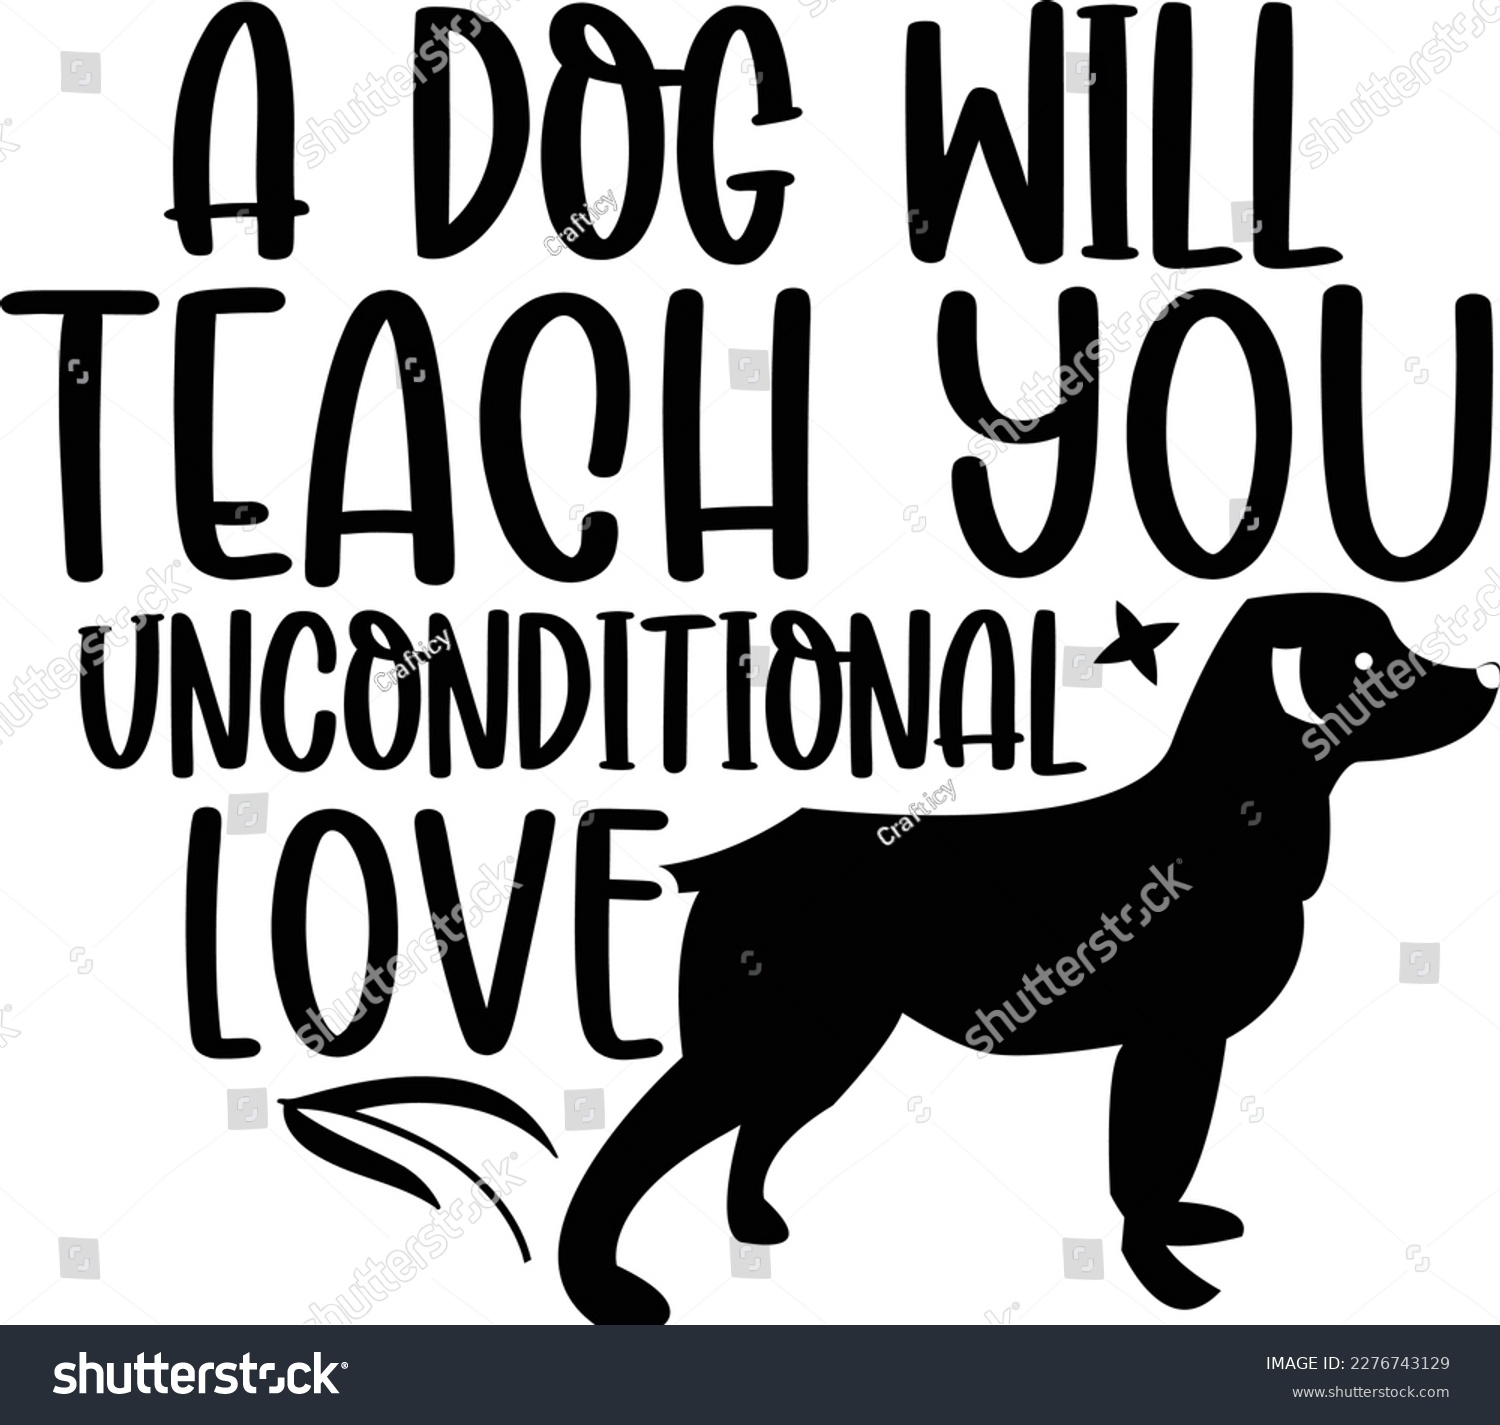 SVG of A dog will teach you unconditional love dog life svg best typography tshirt design premium vector   svg